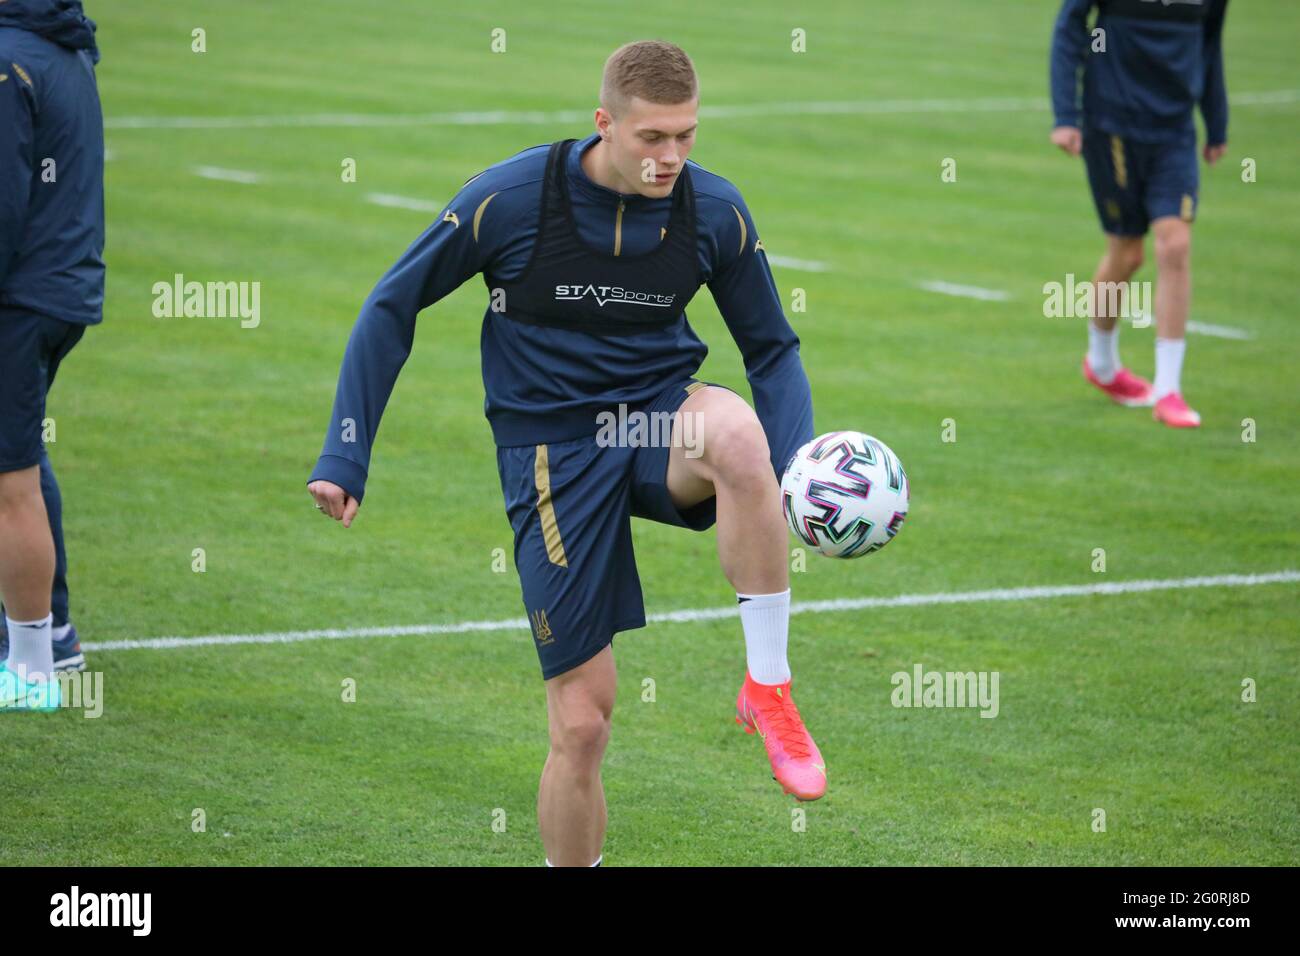 Non Exclusive: KHARKIV, UKRAINE - JUNE 2, 2021 - A player of Ukraine kicks the ball during the open training session ahead of a friendly fixture again Stock Photo